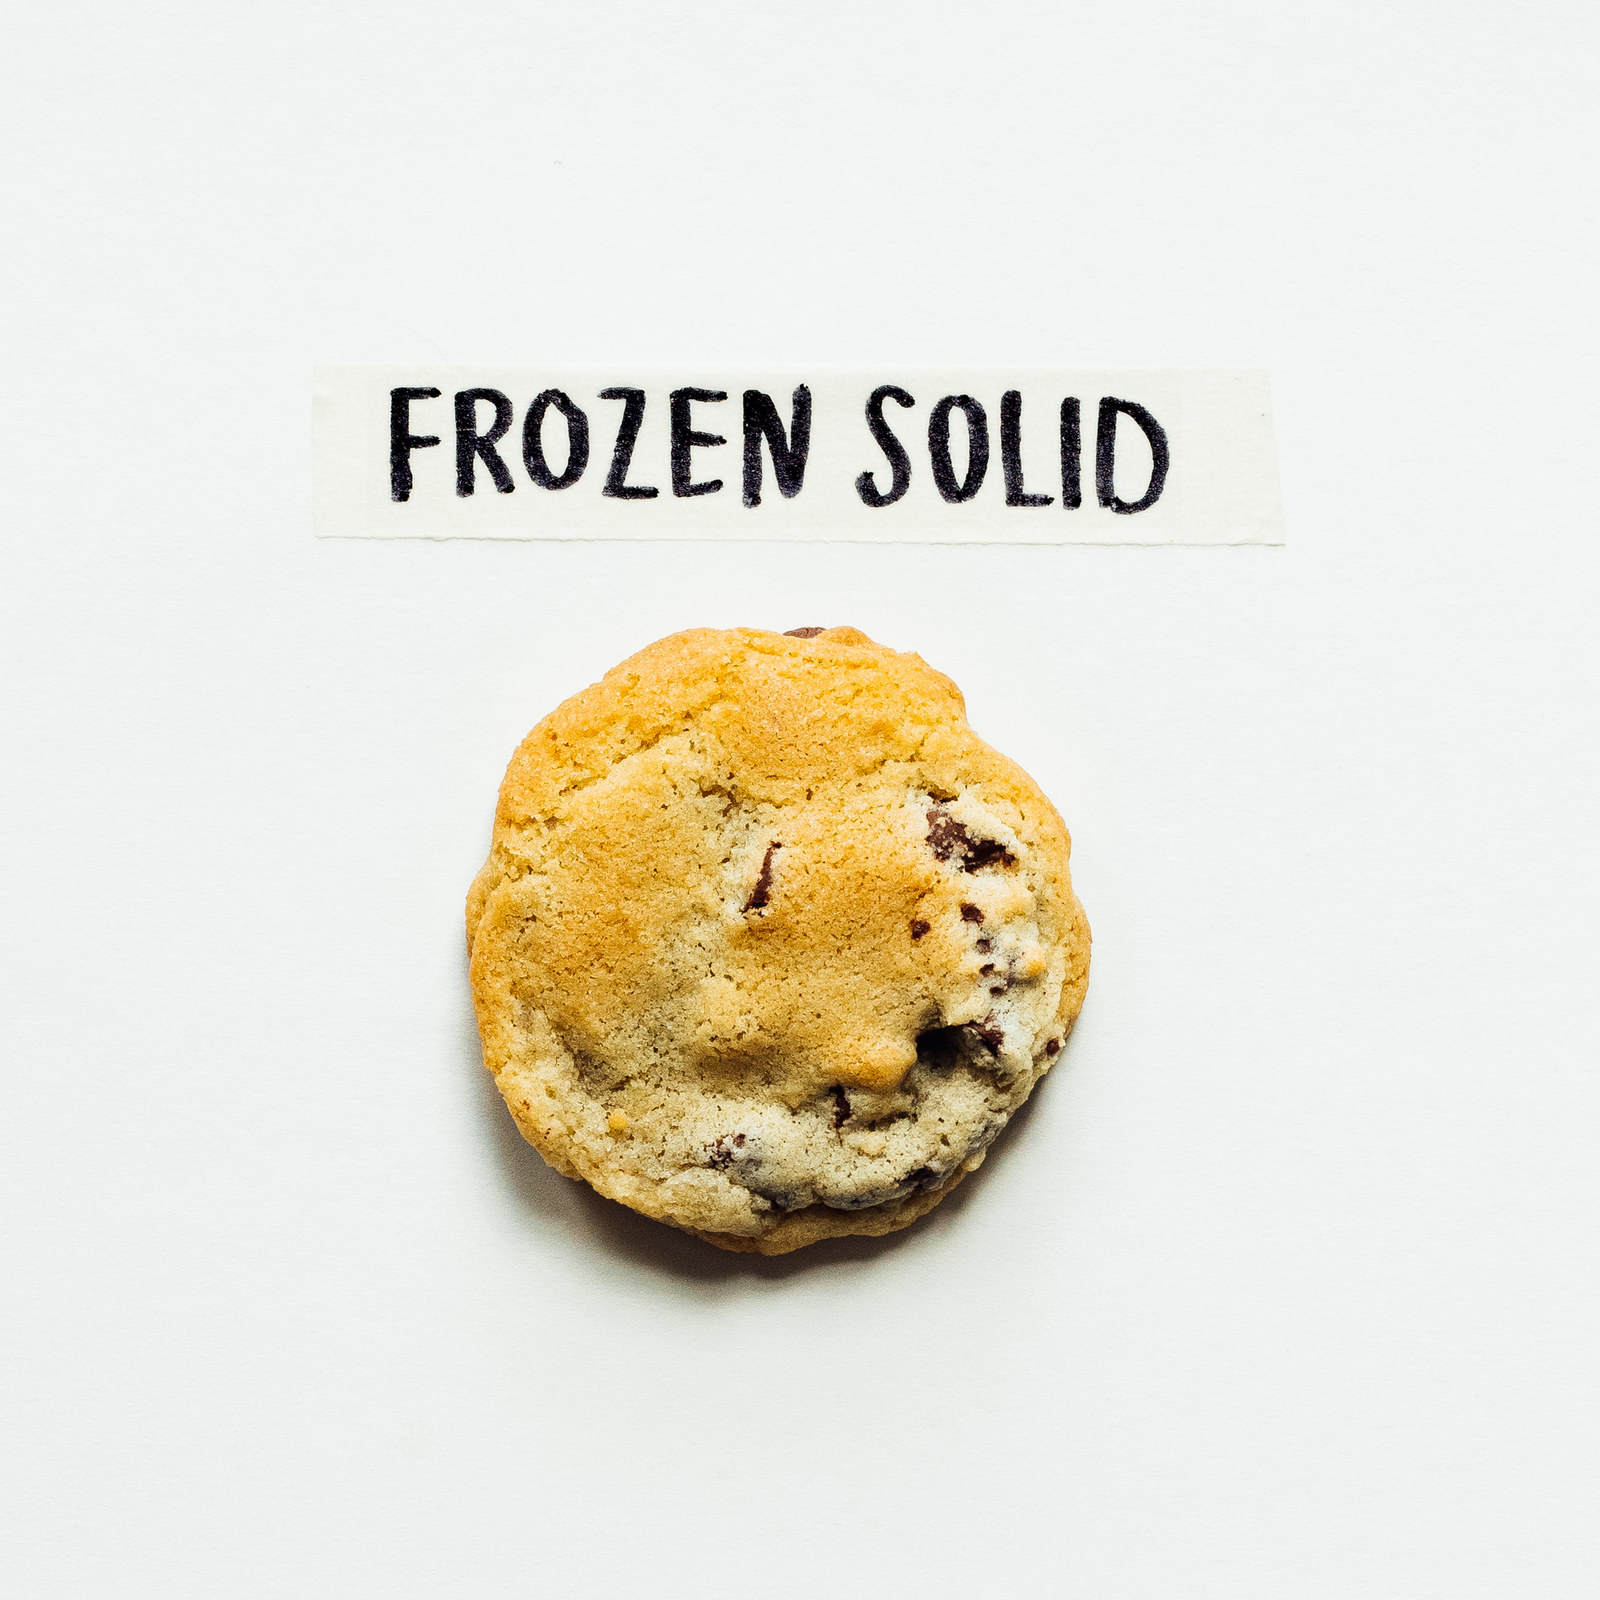 Pampered Chef - Frosty's melting! Refrigerated cookie dough takes